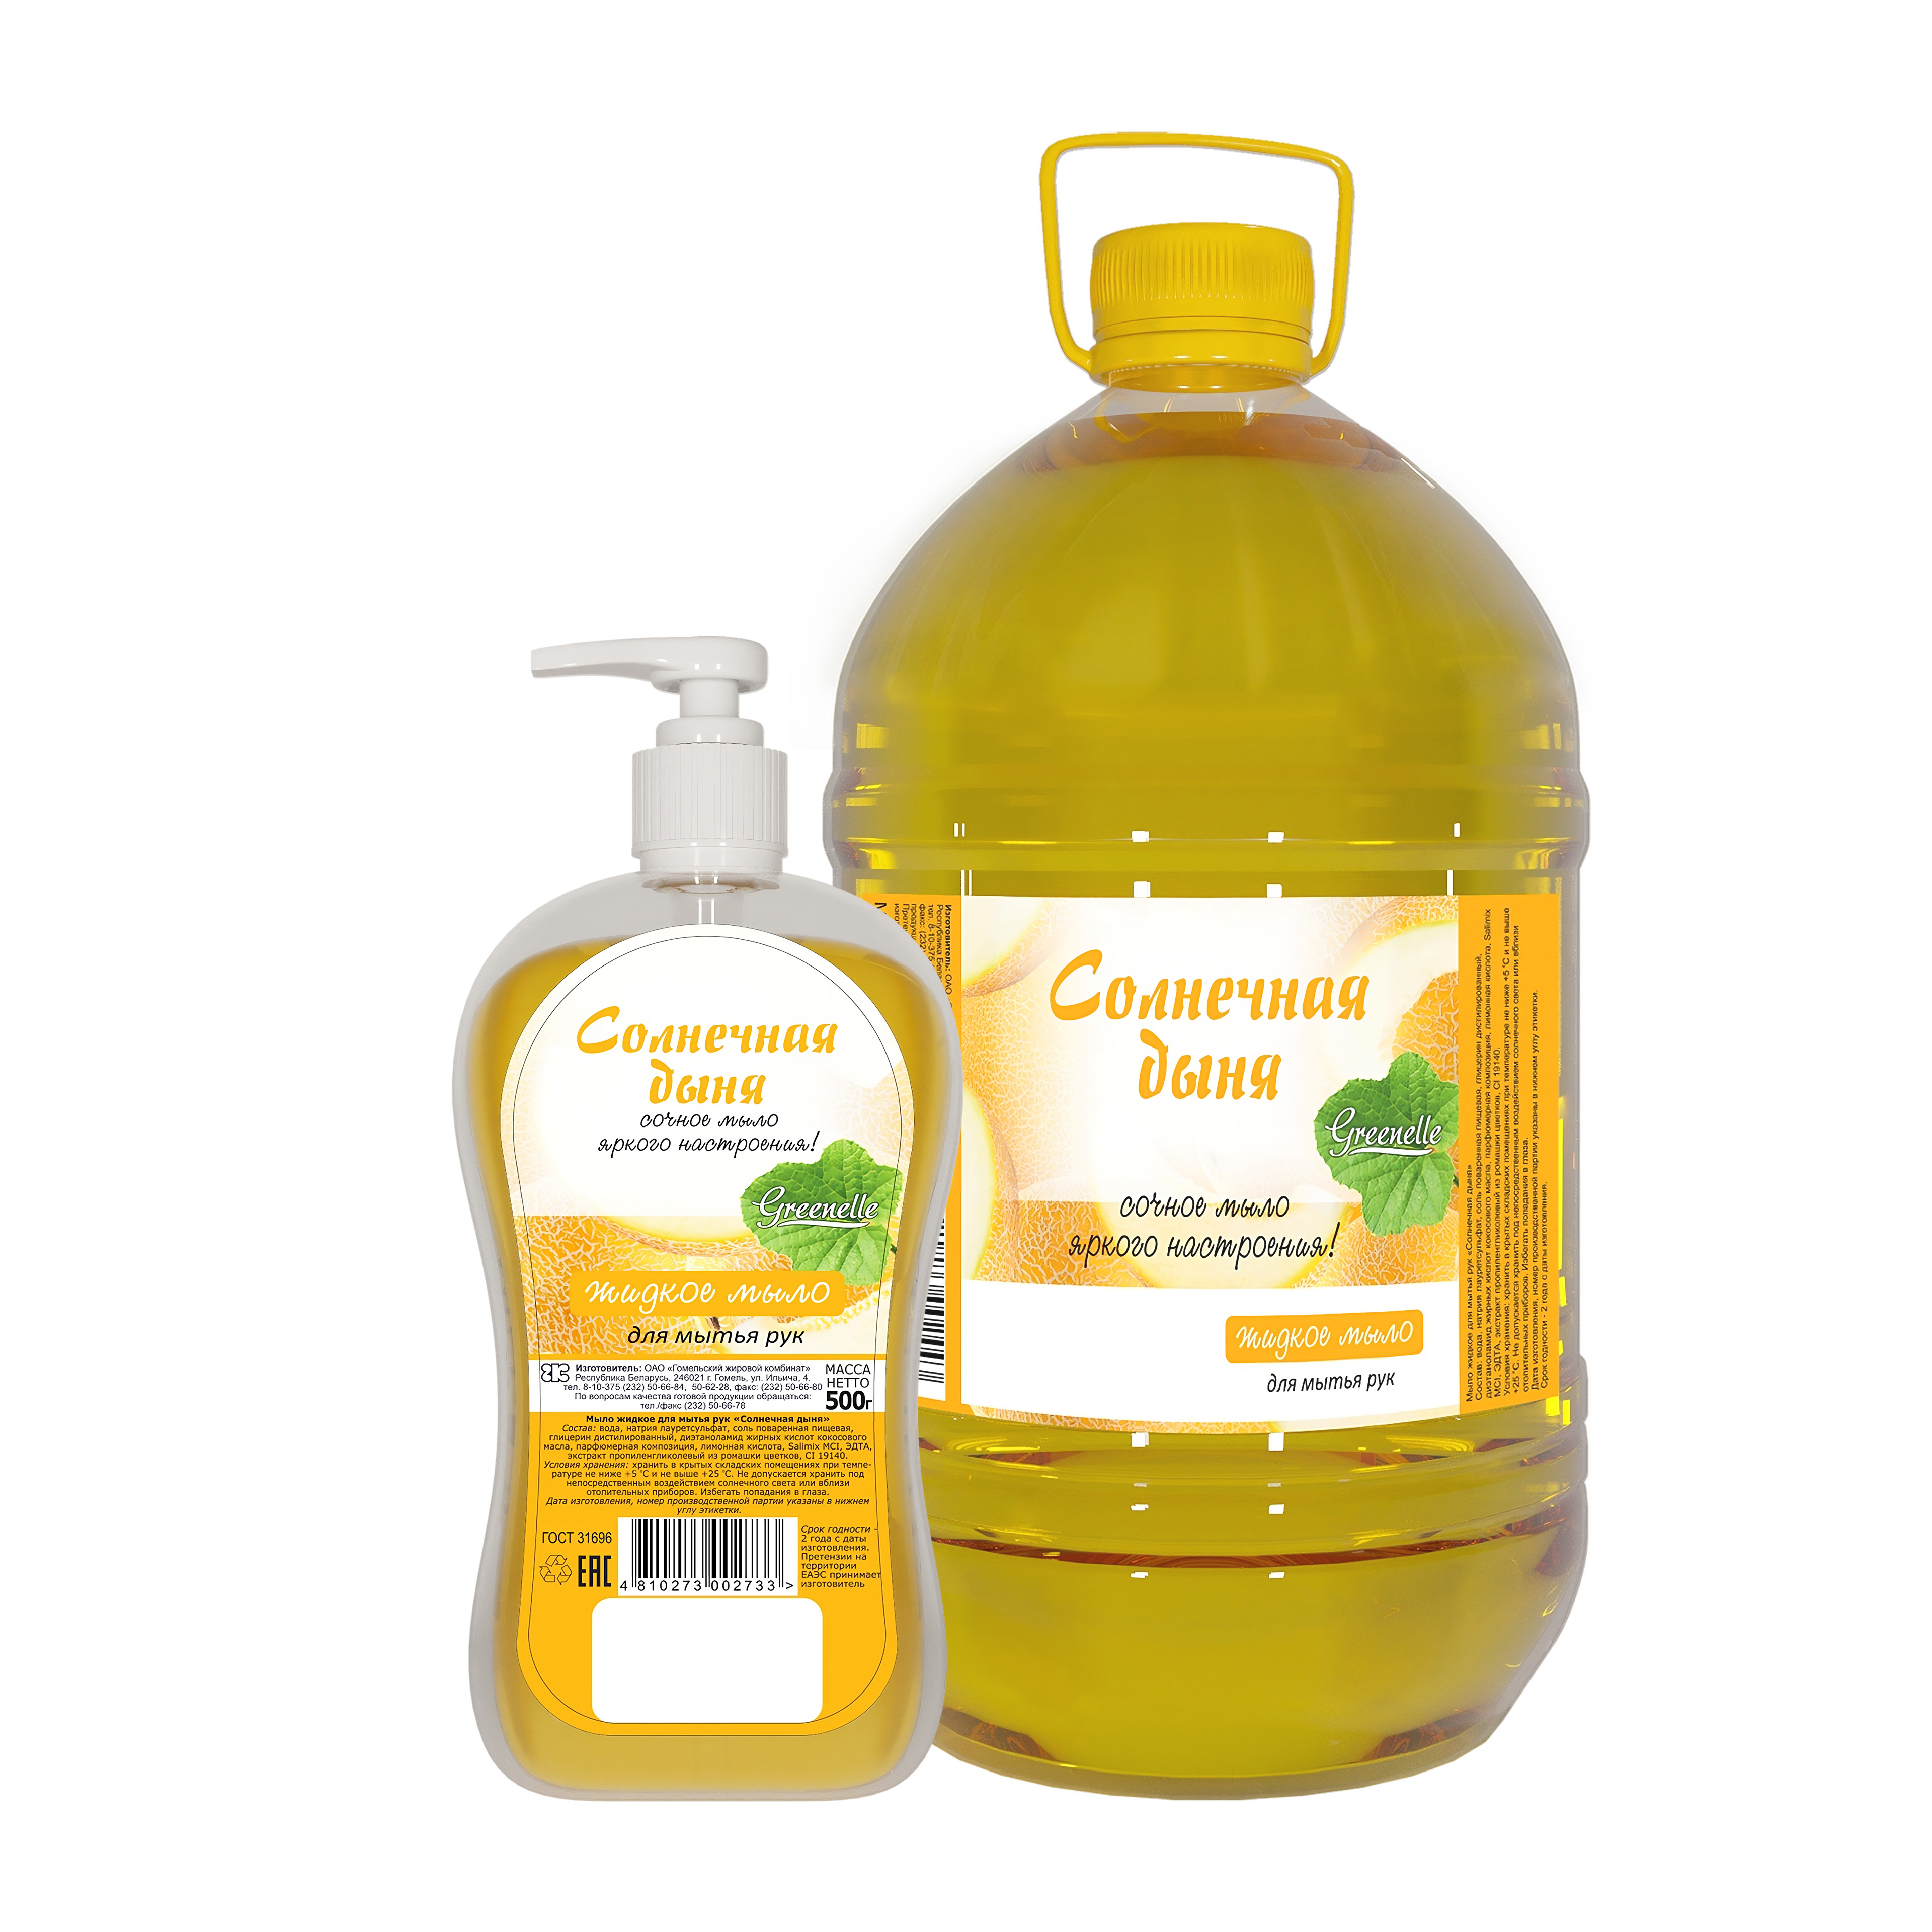 Liquid soap Sunny melon wholesale from the manufacturer